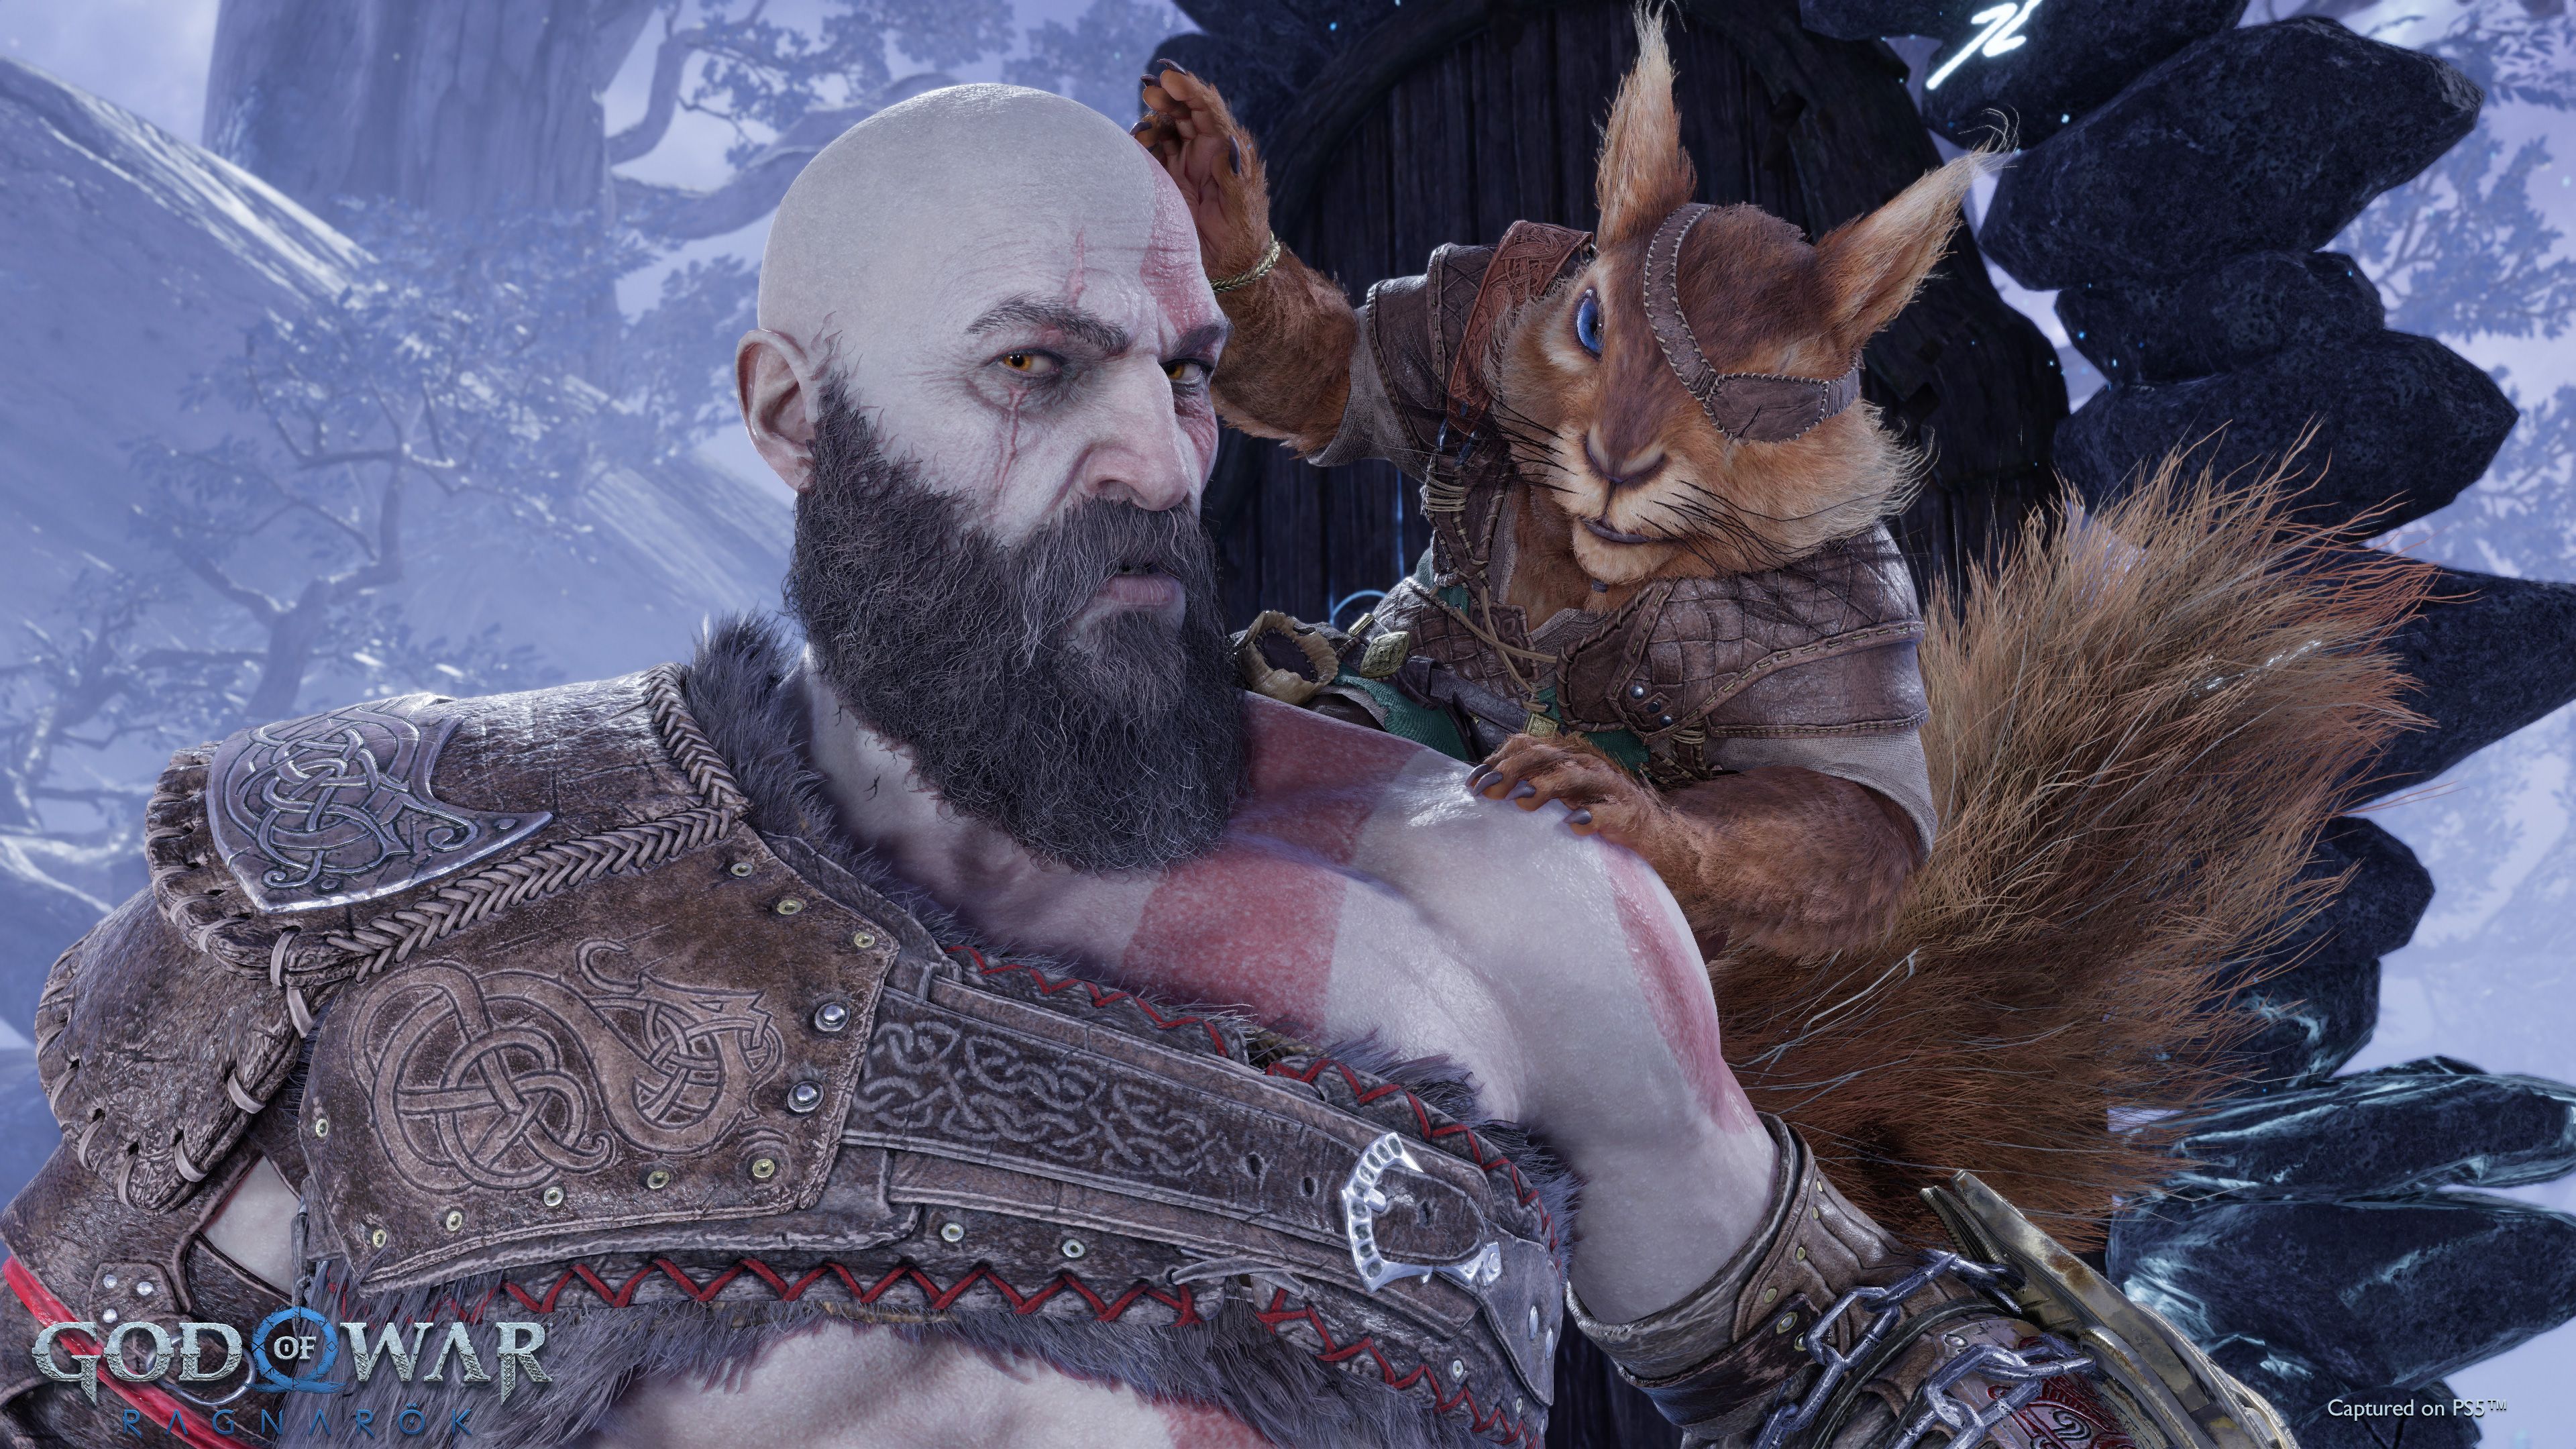 3840px x 2160px - God of War RagnarÃ¶k' Review: the Contradictions of Kratos